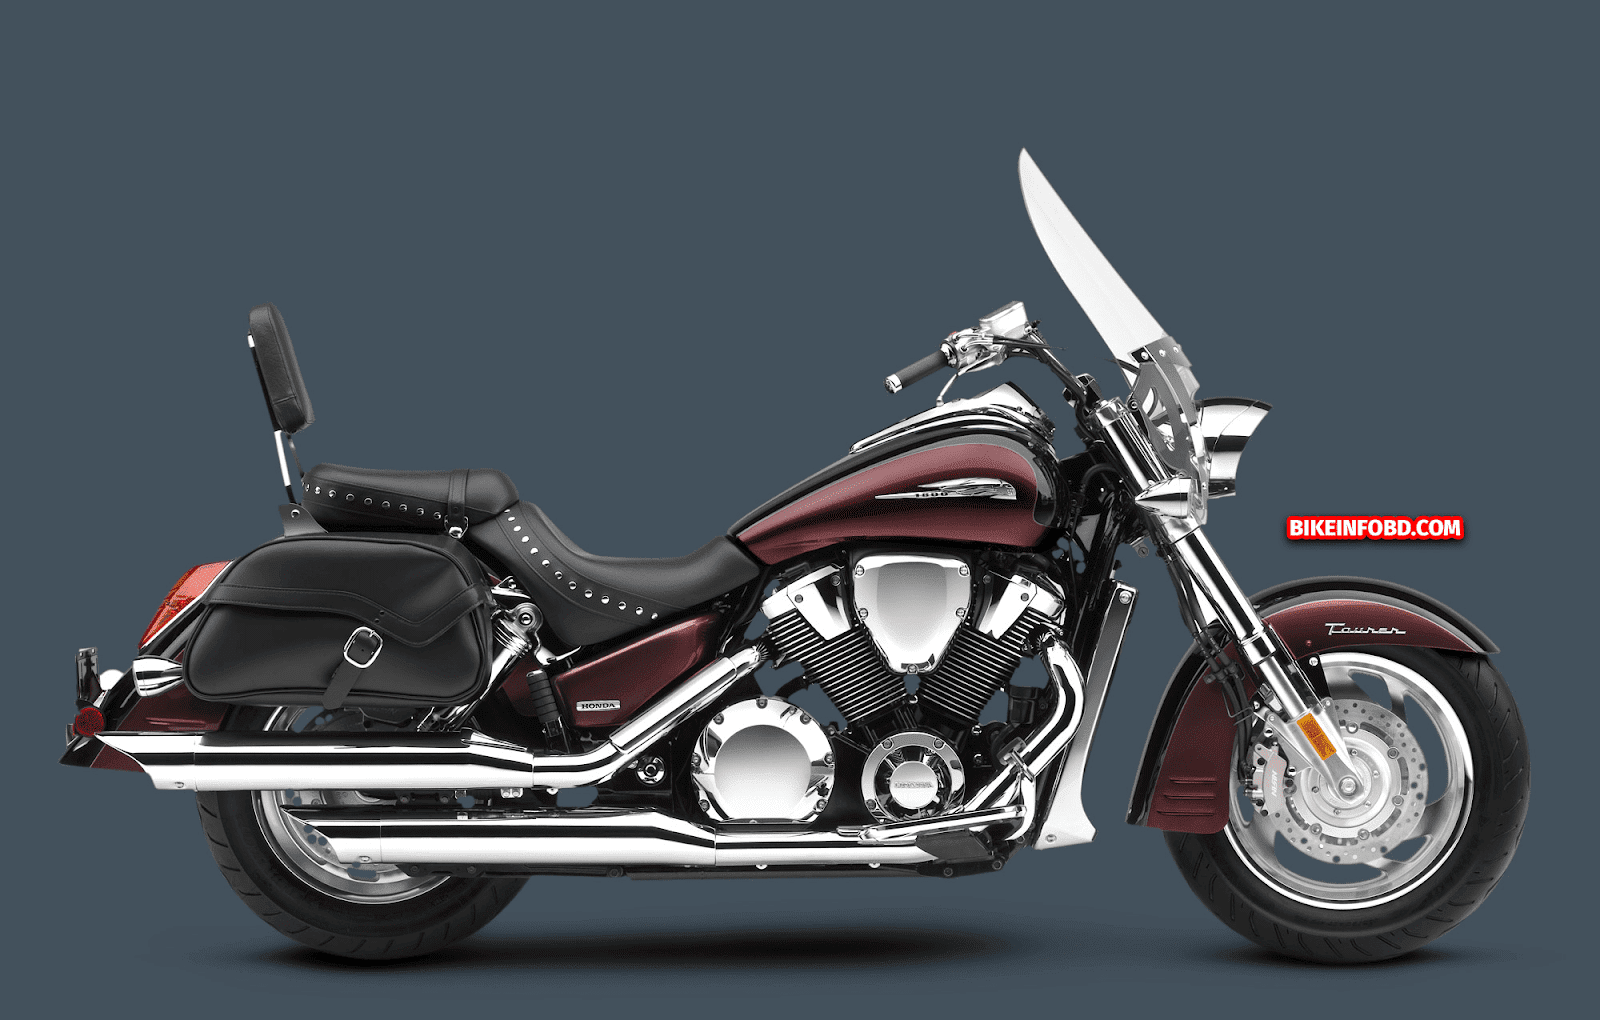 Honda VTX 1800 Specifications, Review, Top Speed, Picture